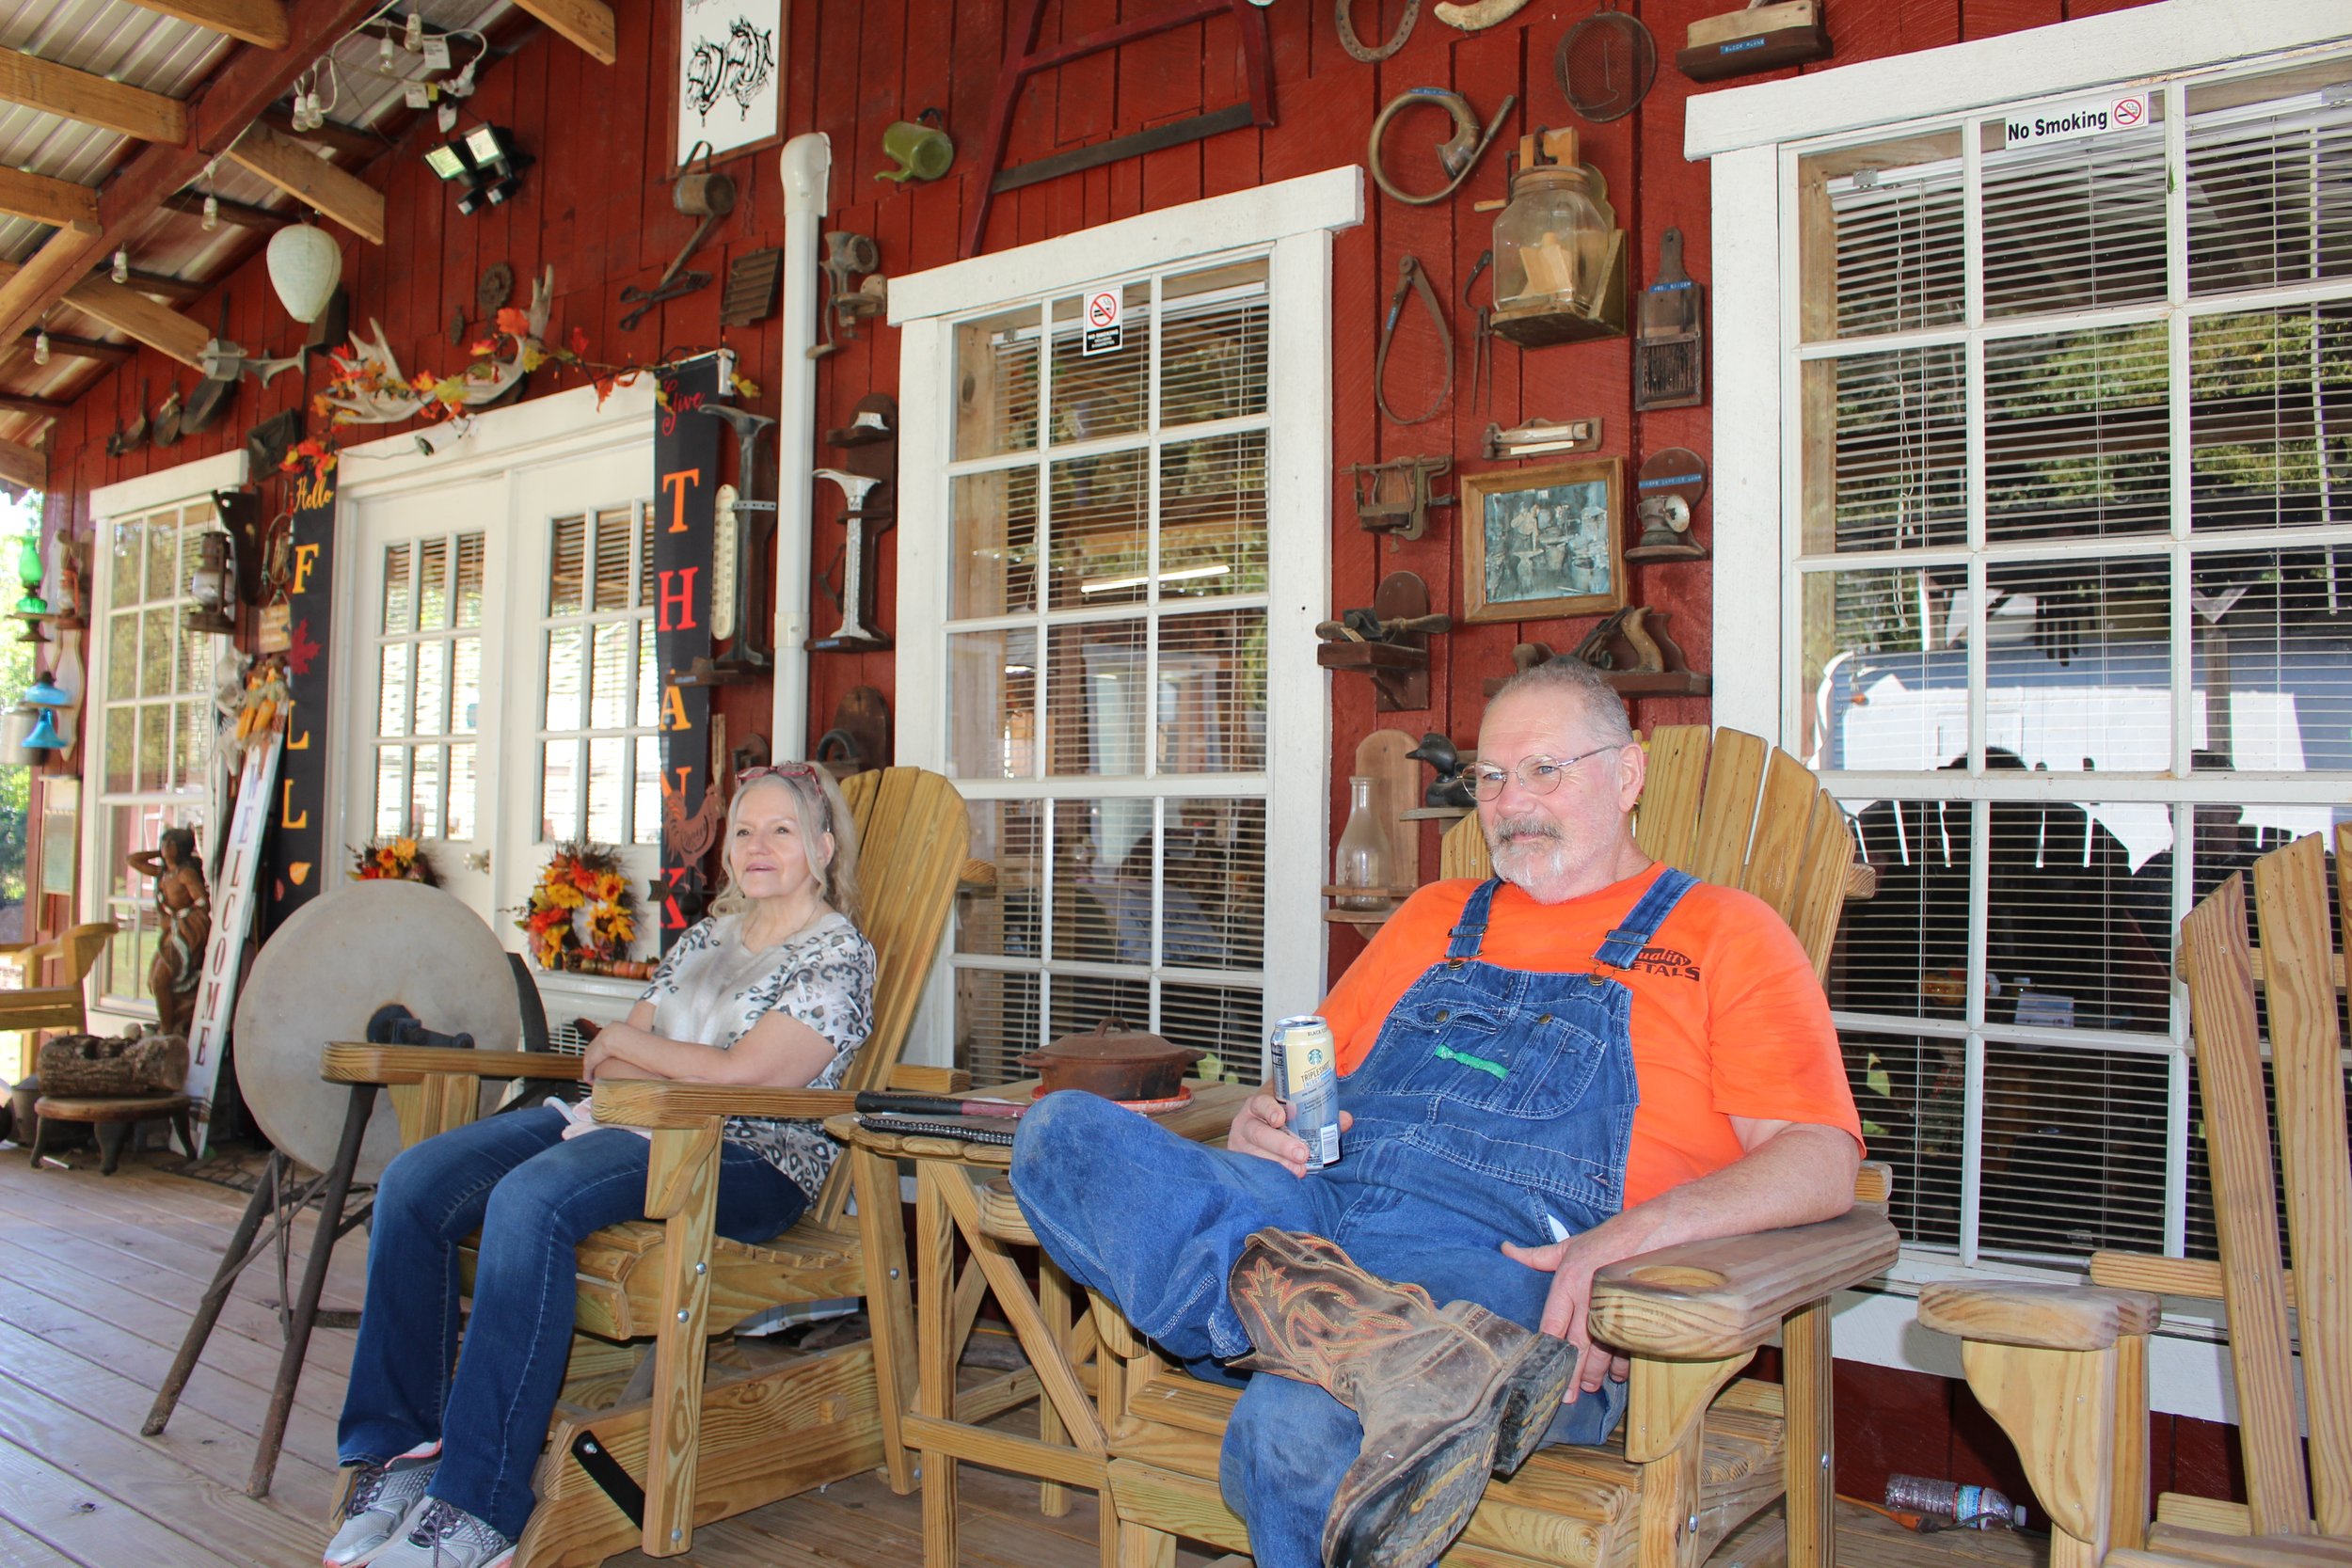  Johnny Smith and wife Brenda of Sugar Creek Carriage Company, Nashville TN relaxing during our BWFA visit on their country home porch. 